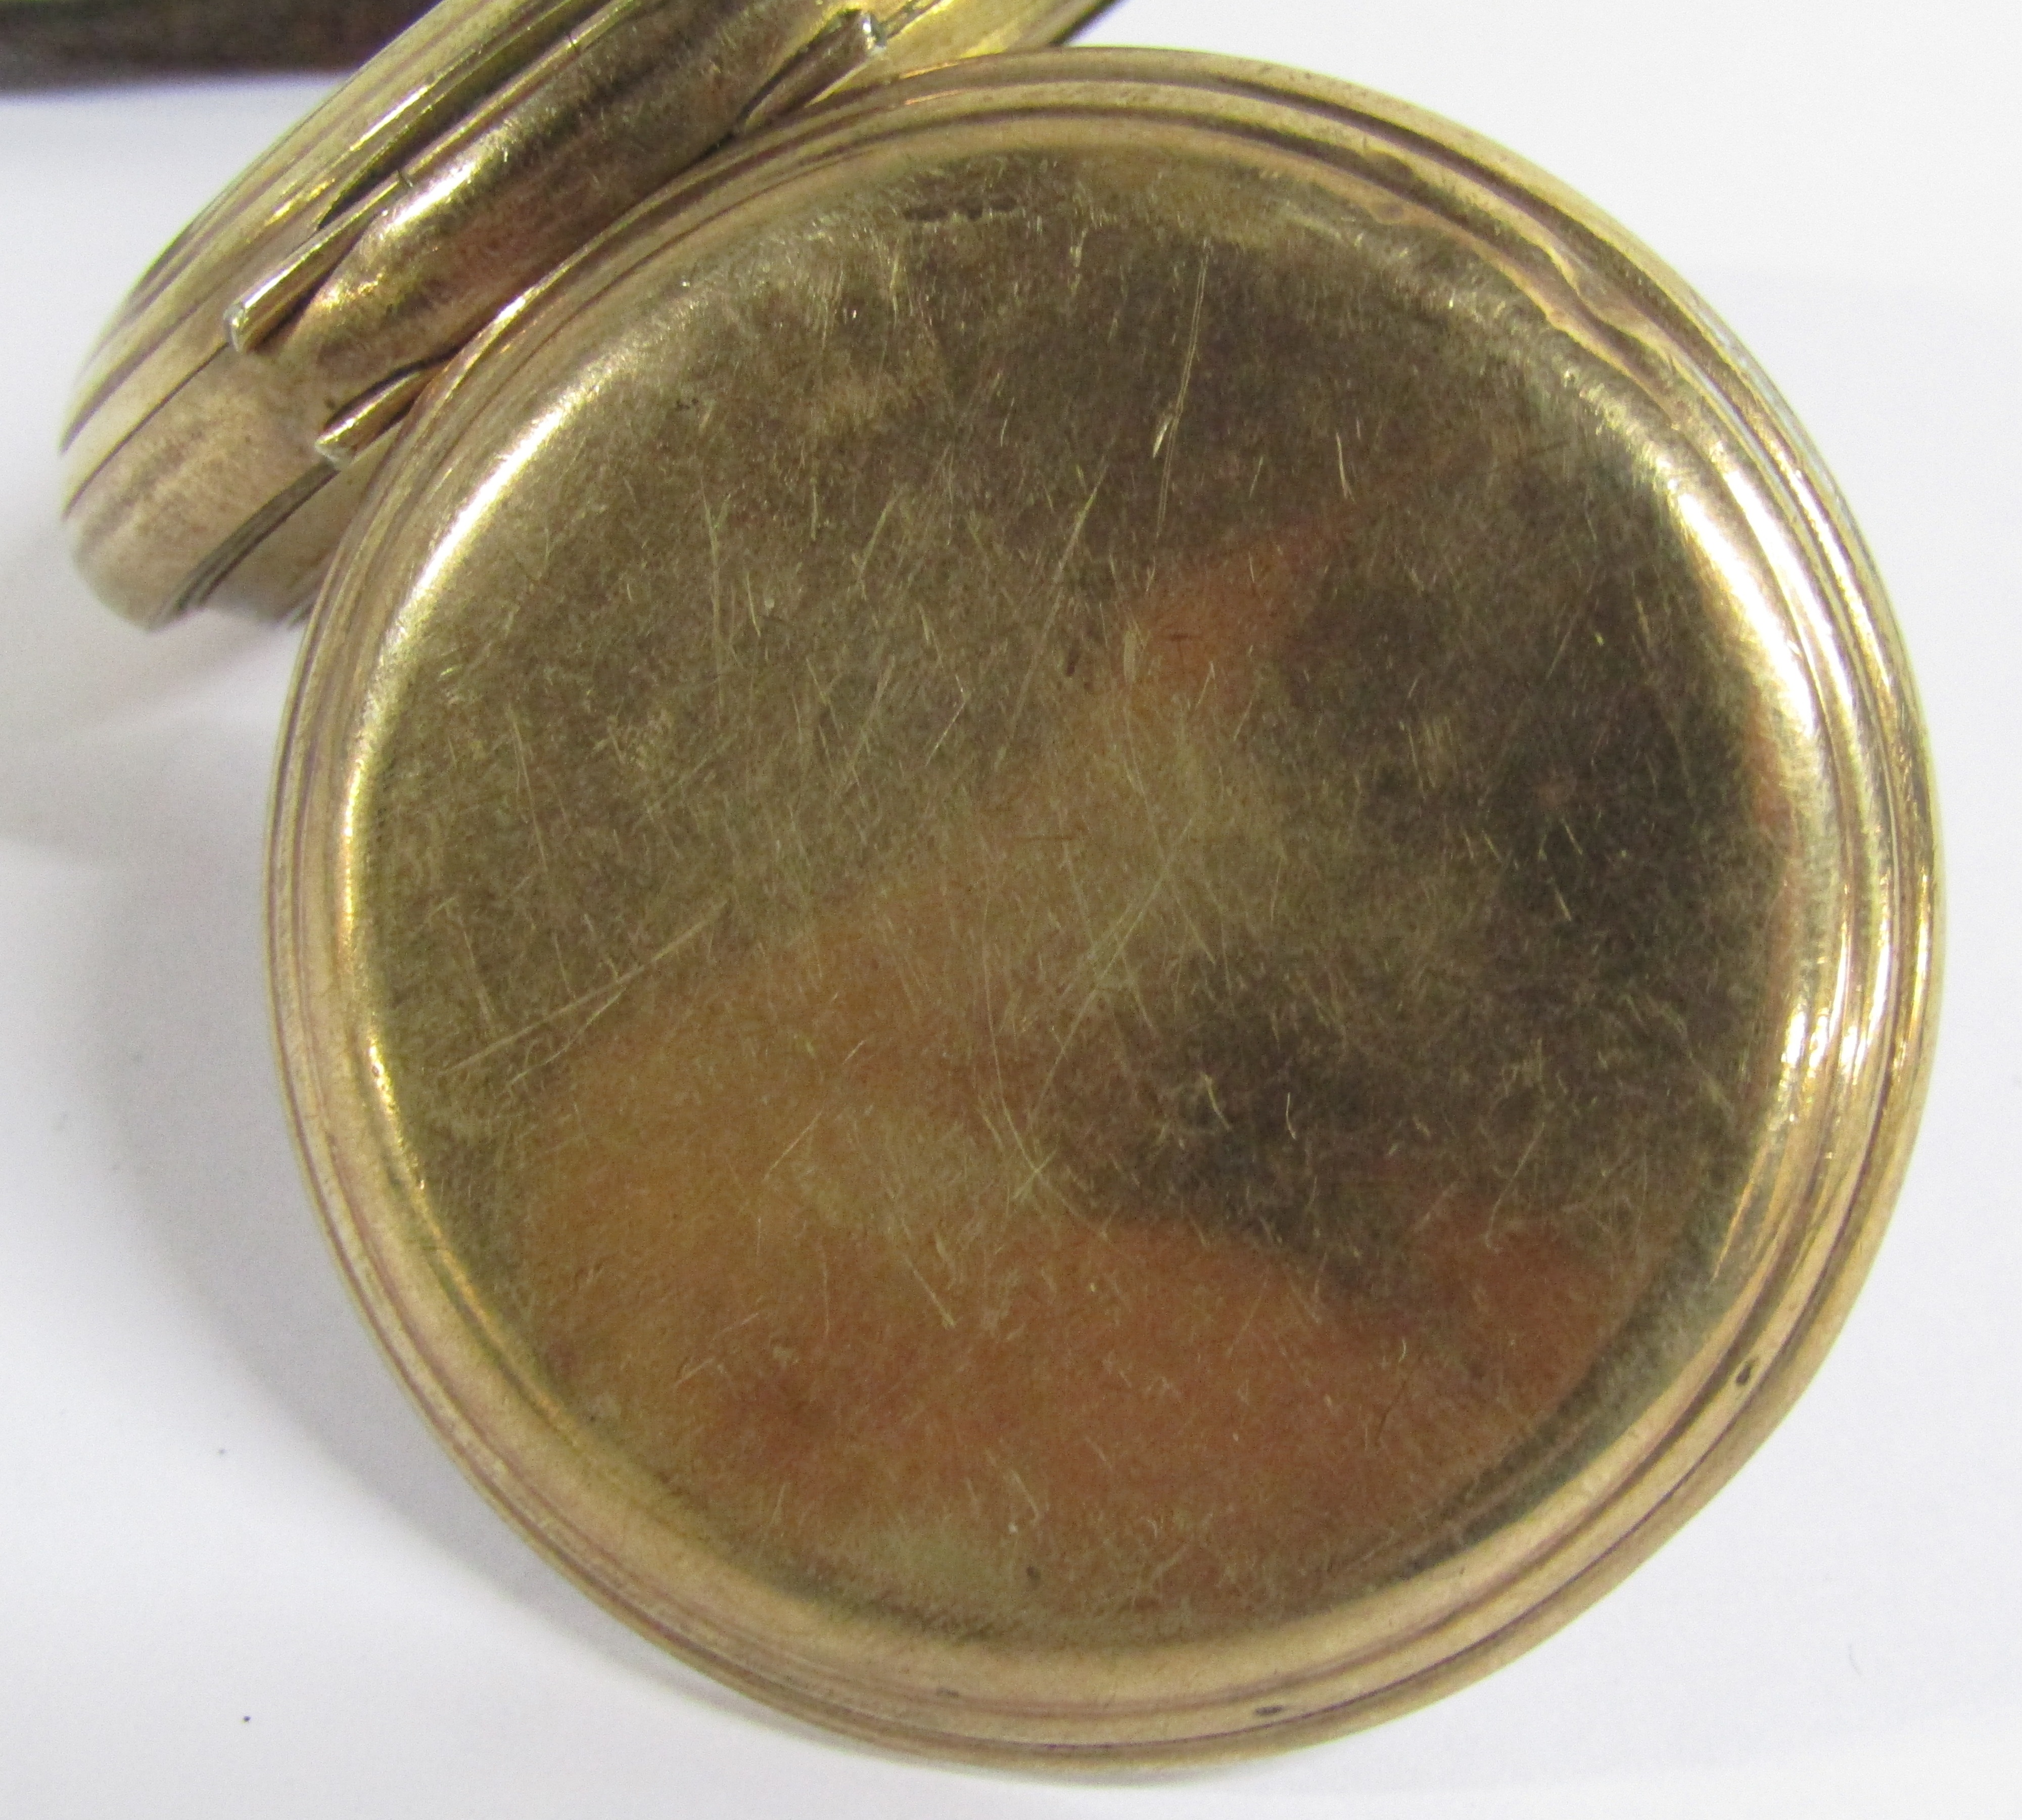 3 pocket watches - A.W.W. Co Waltham Mass gold plated, Thomas Russell & Son Liverpool gold plated - Image 7 of 18